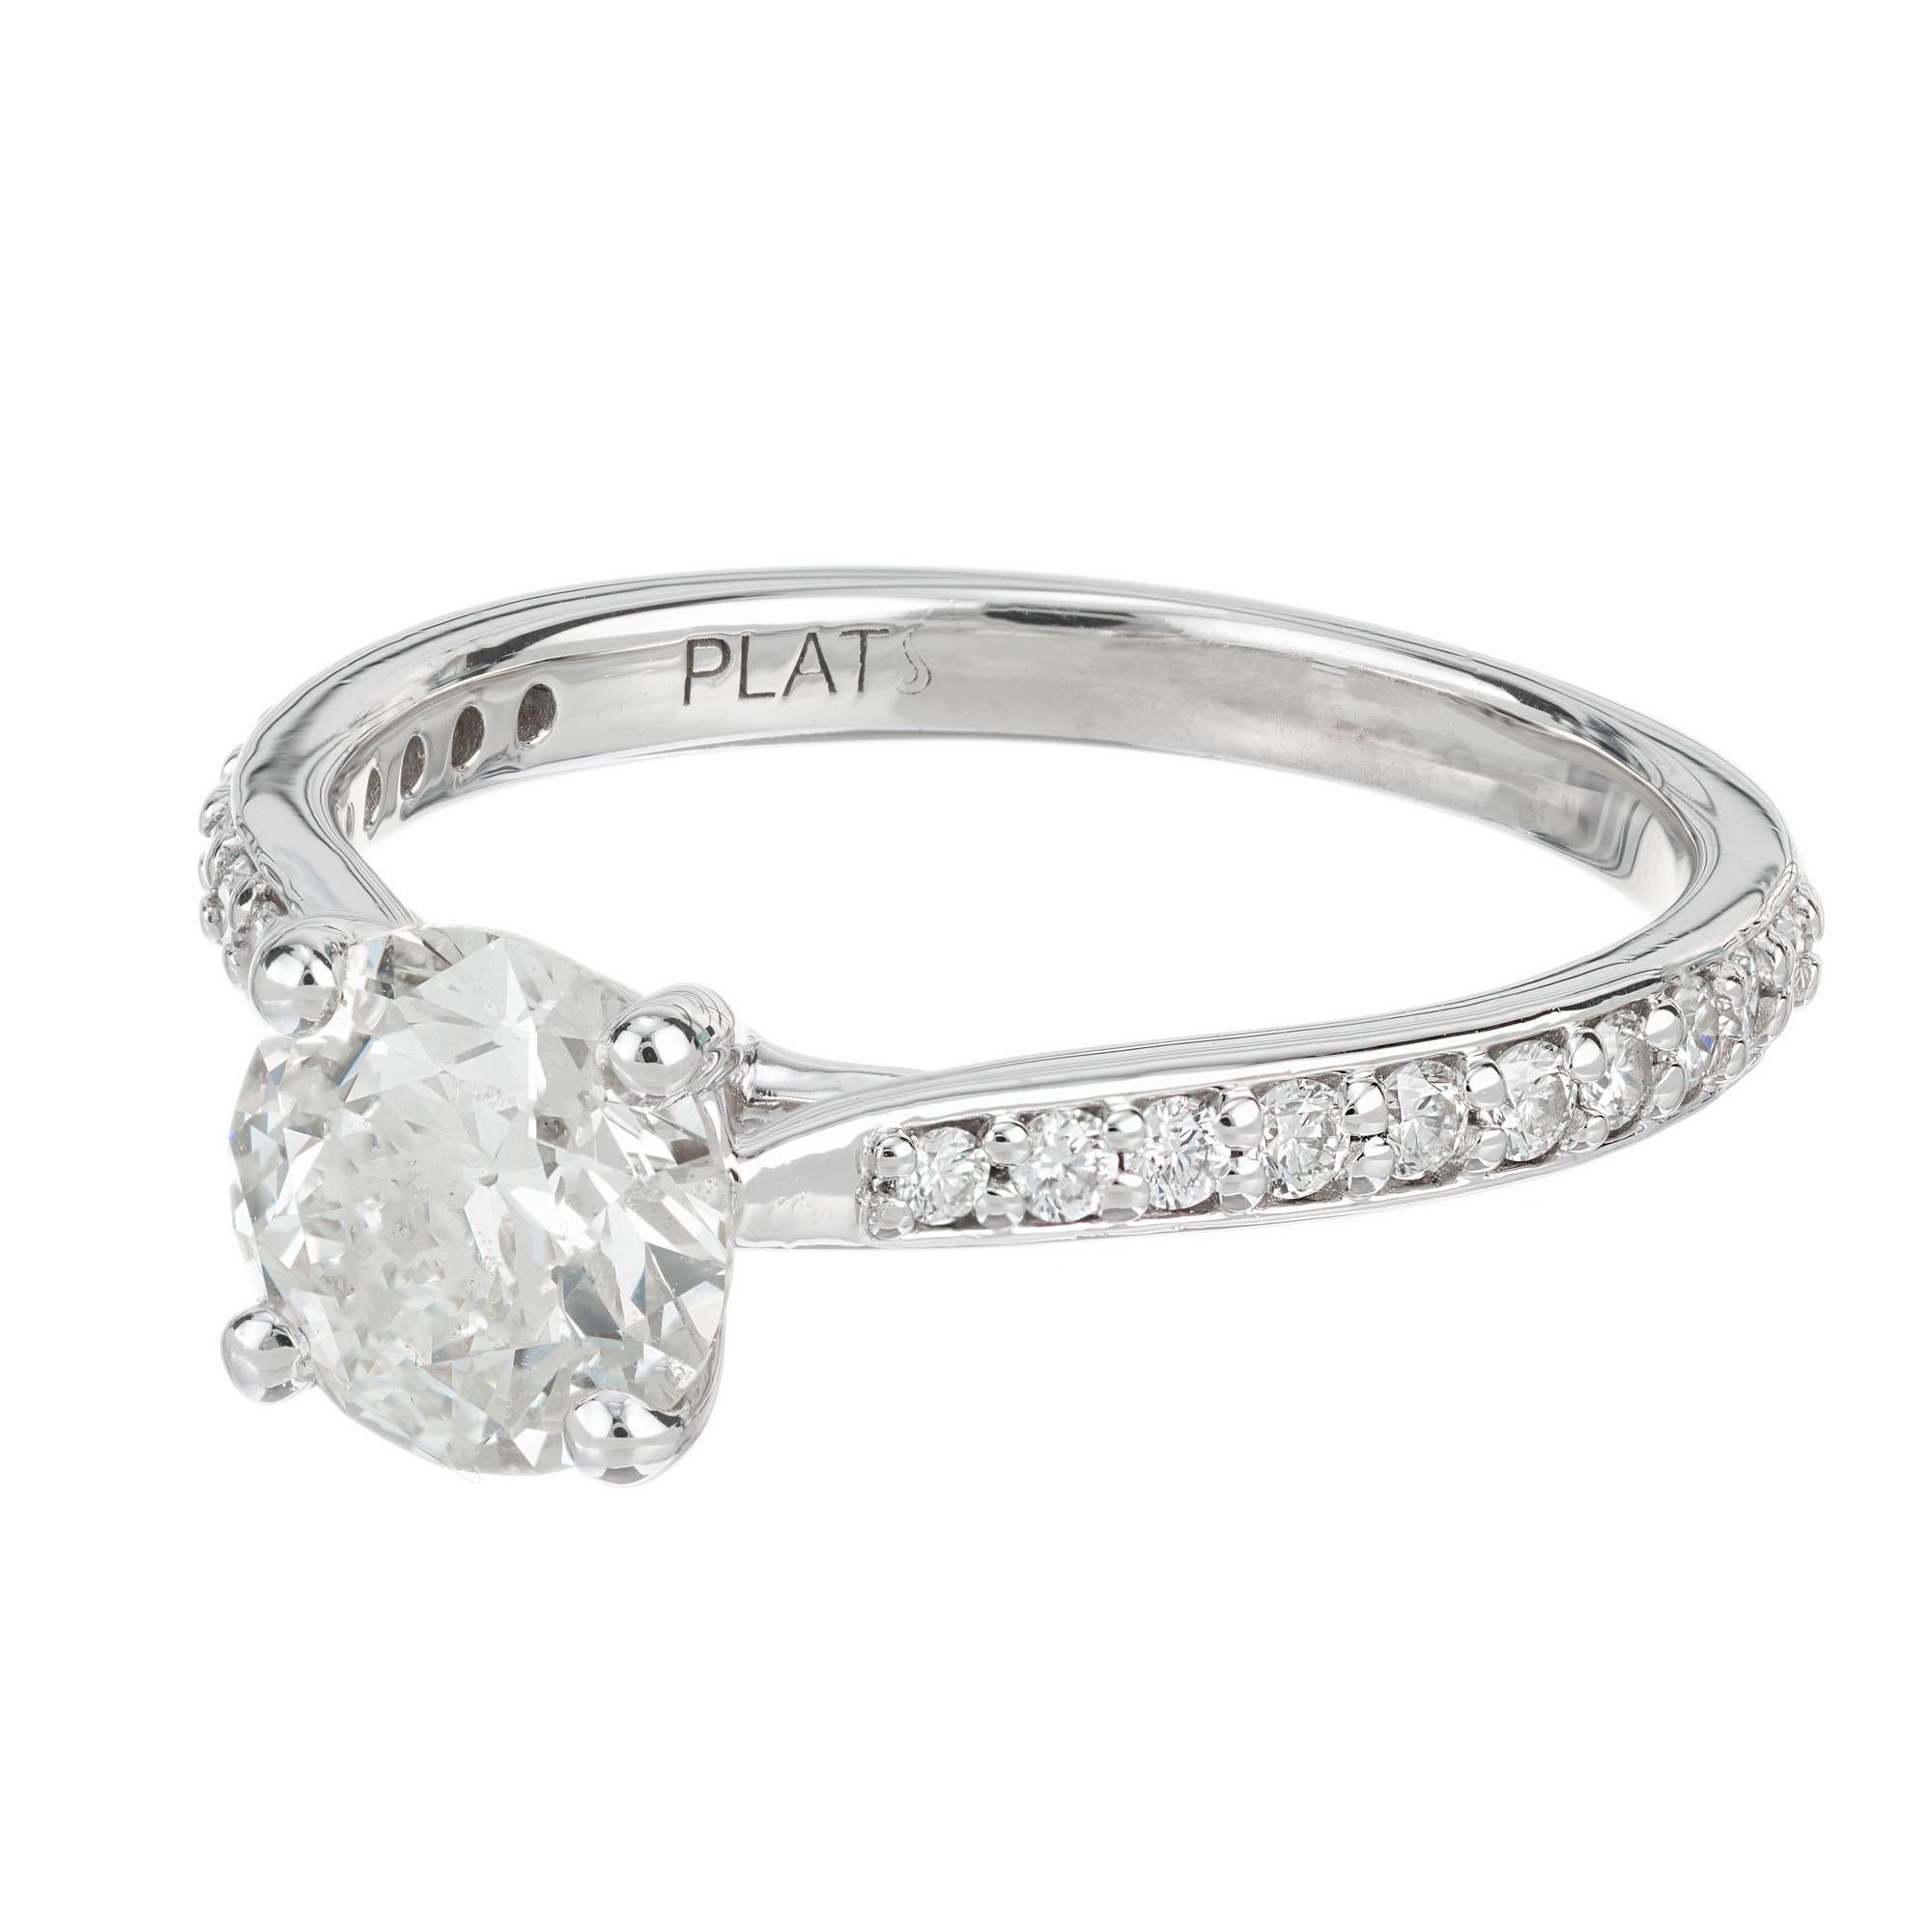 Peter Suchy diamond platinum engagement ring. EGL certified 1.19ct center stone in a platinum solitaire setting with 20 round brilliant cut bead set diamonds along the shoulders. Designed and crafted in the Peter Suchy workshop 

1 round brilliant